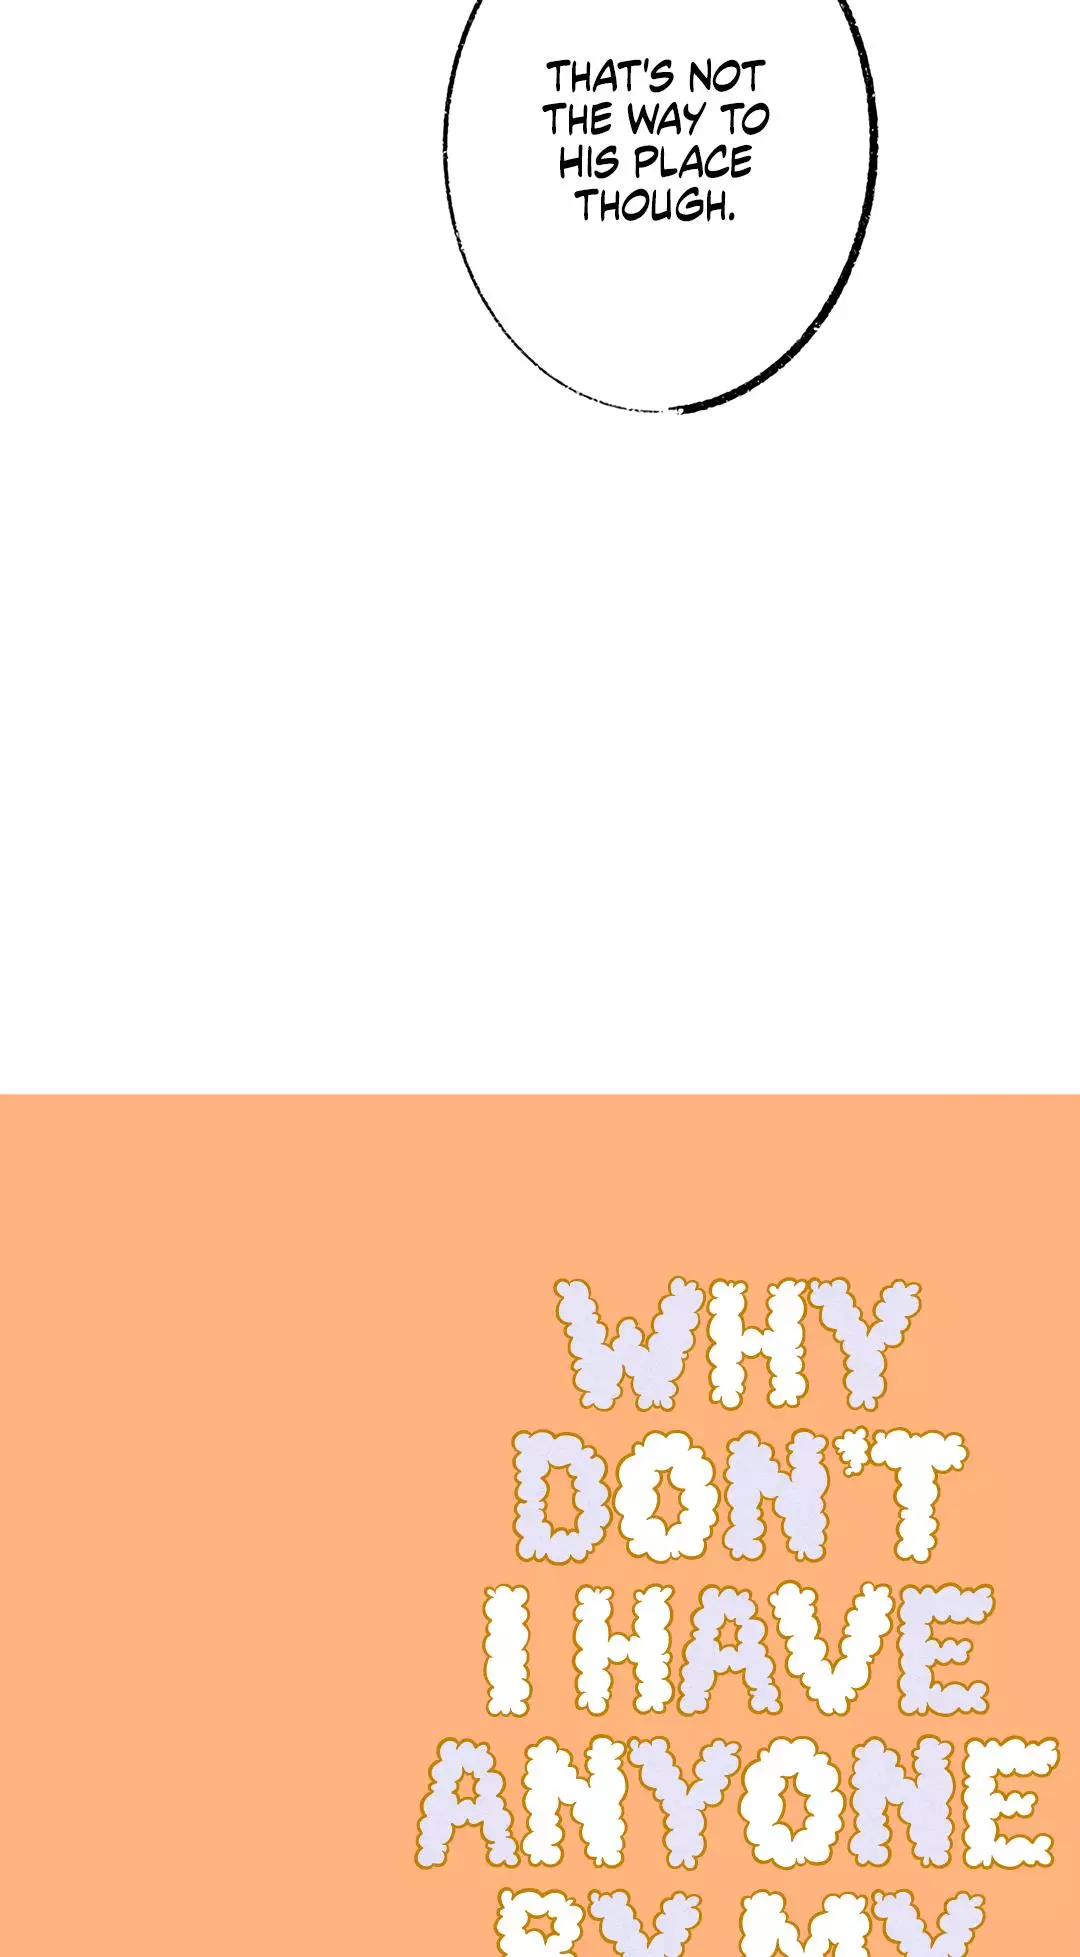 Why Don't I Have Anyone By My Side? - 38 page 23-2102c5c5